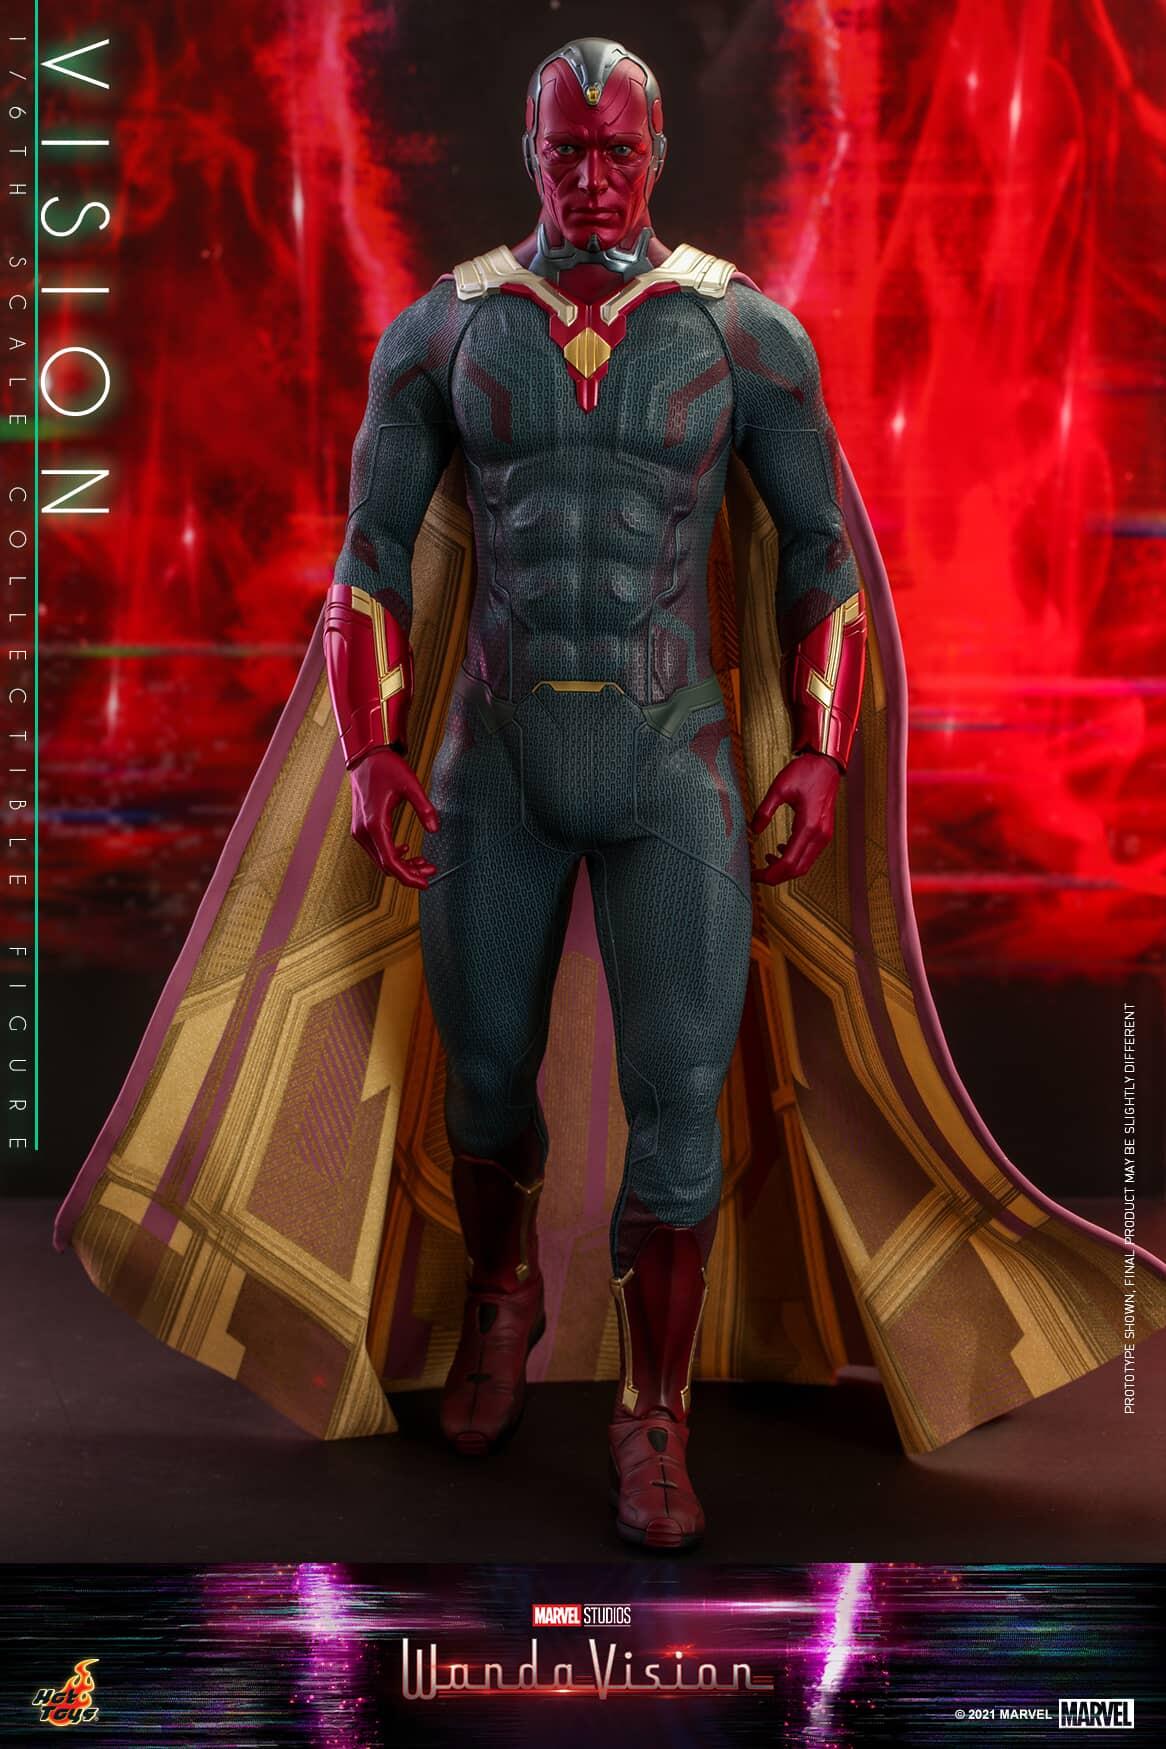 Hot Toys Vision Sixth Scale Figure